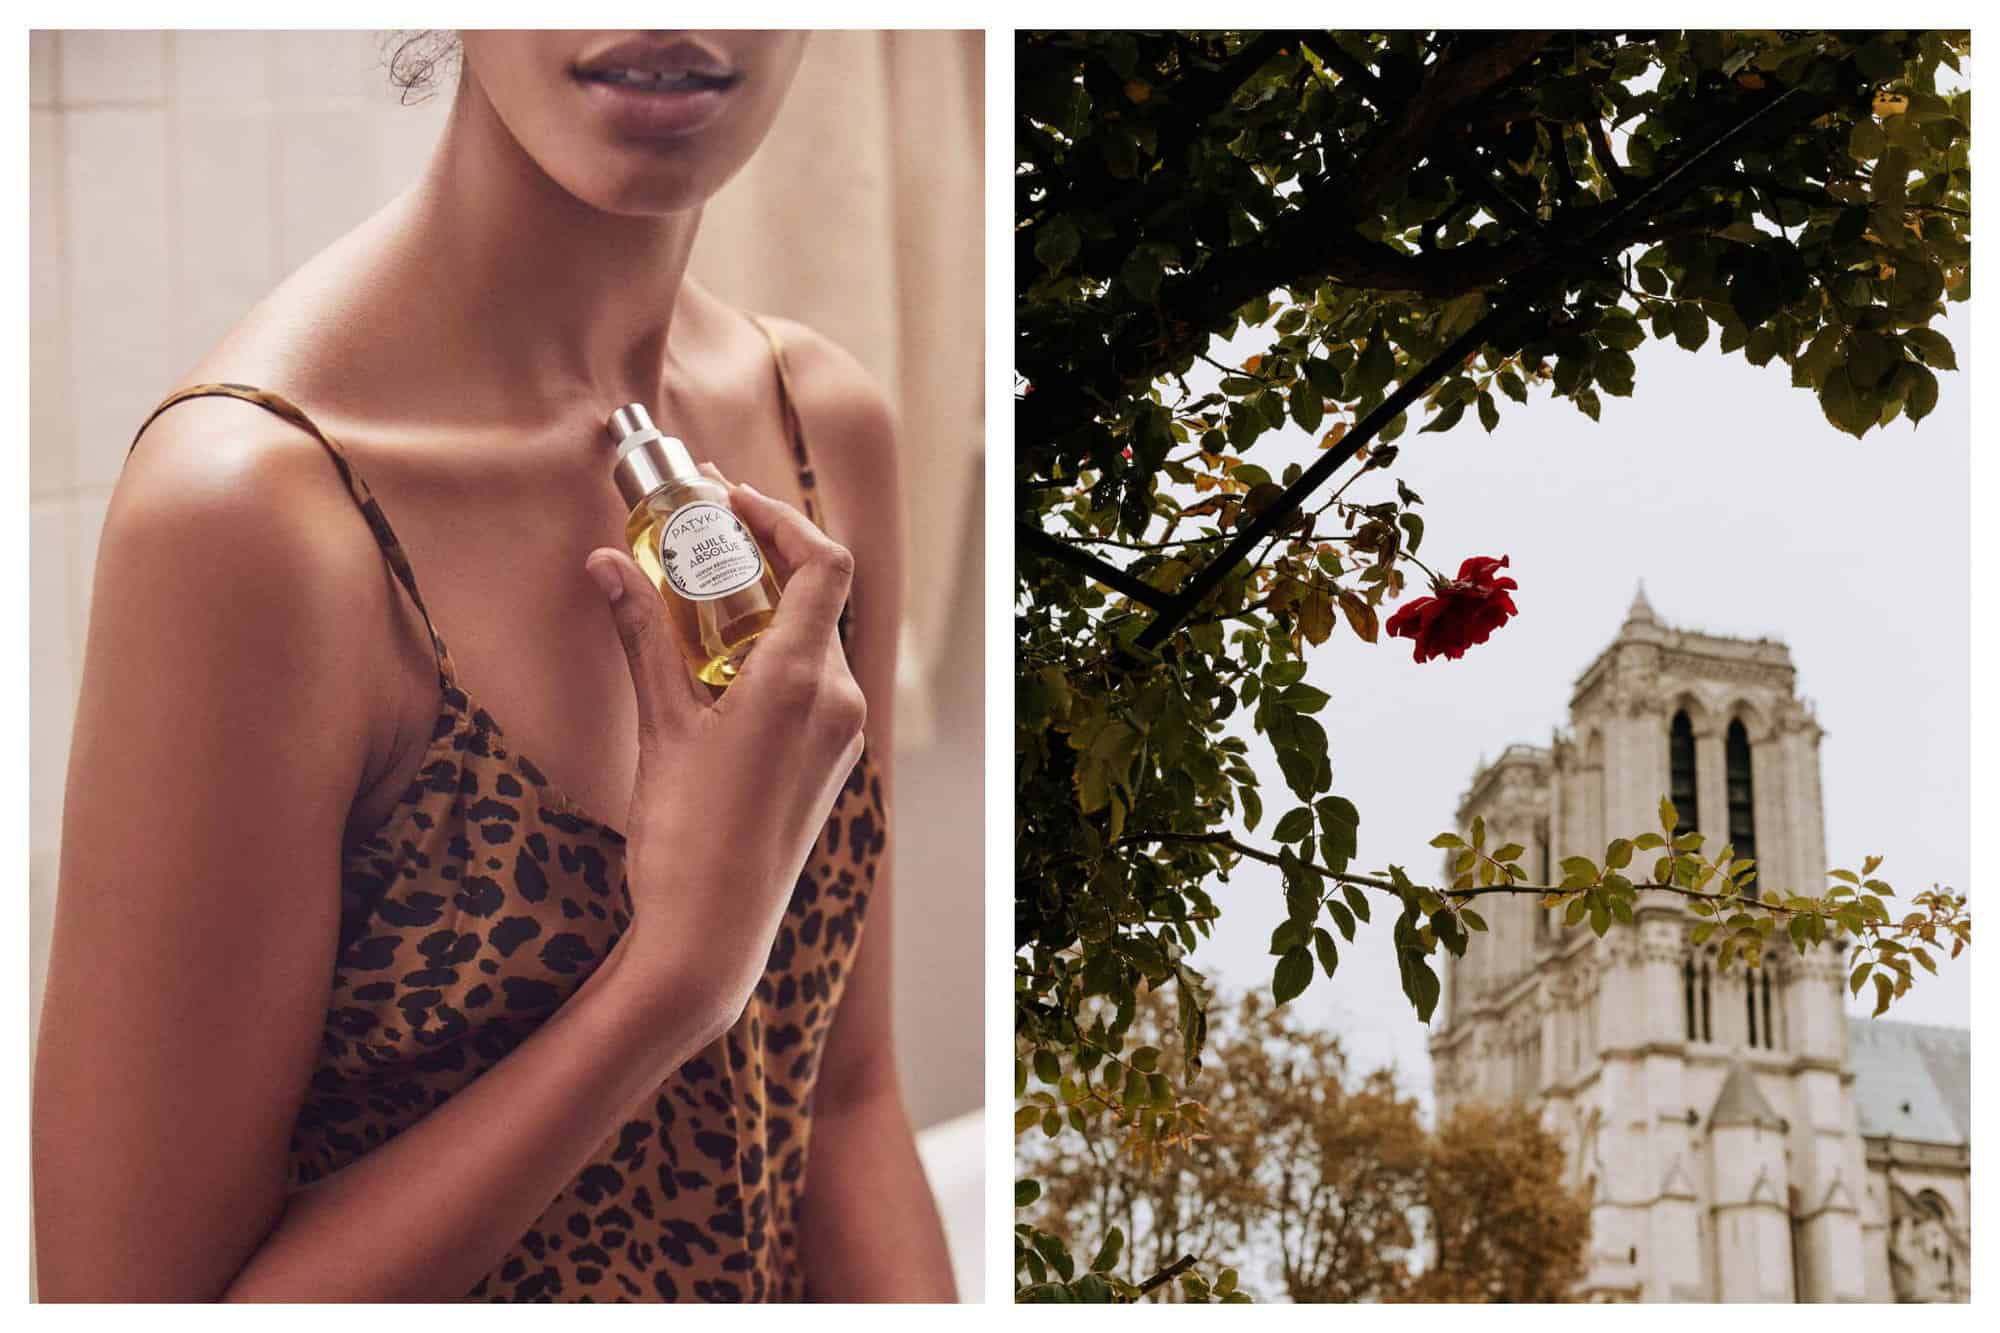 Left: a woman in a bathroom wearing a leopard print camisole holding a bottle of PATYKA huile absolue to her chest. Right: a rose with Notre-Dame in the background.